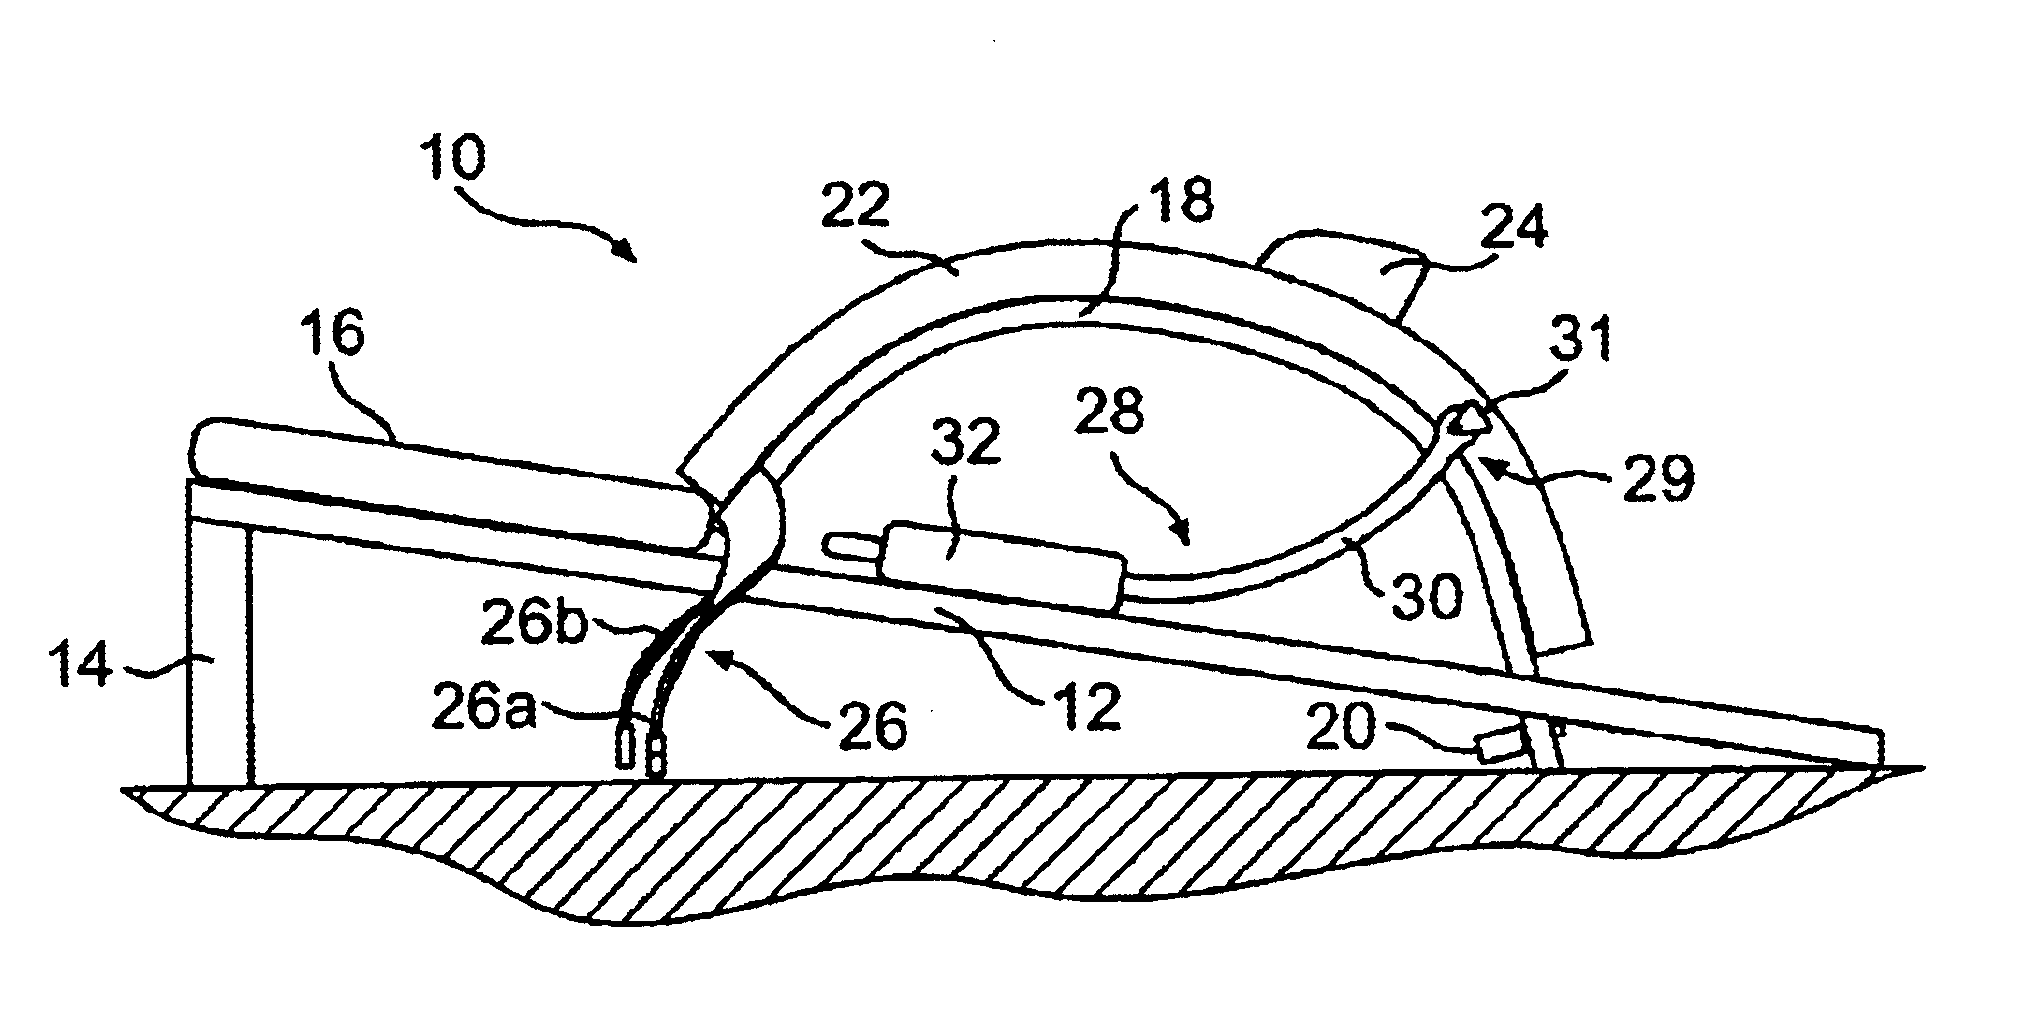 Exercise device for exercising of the abdominal muscles